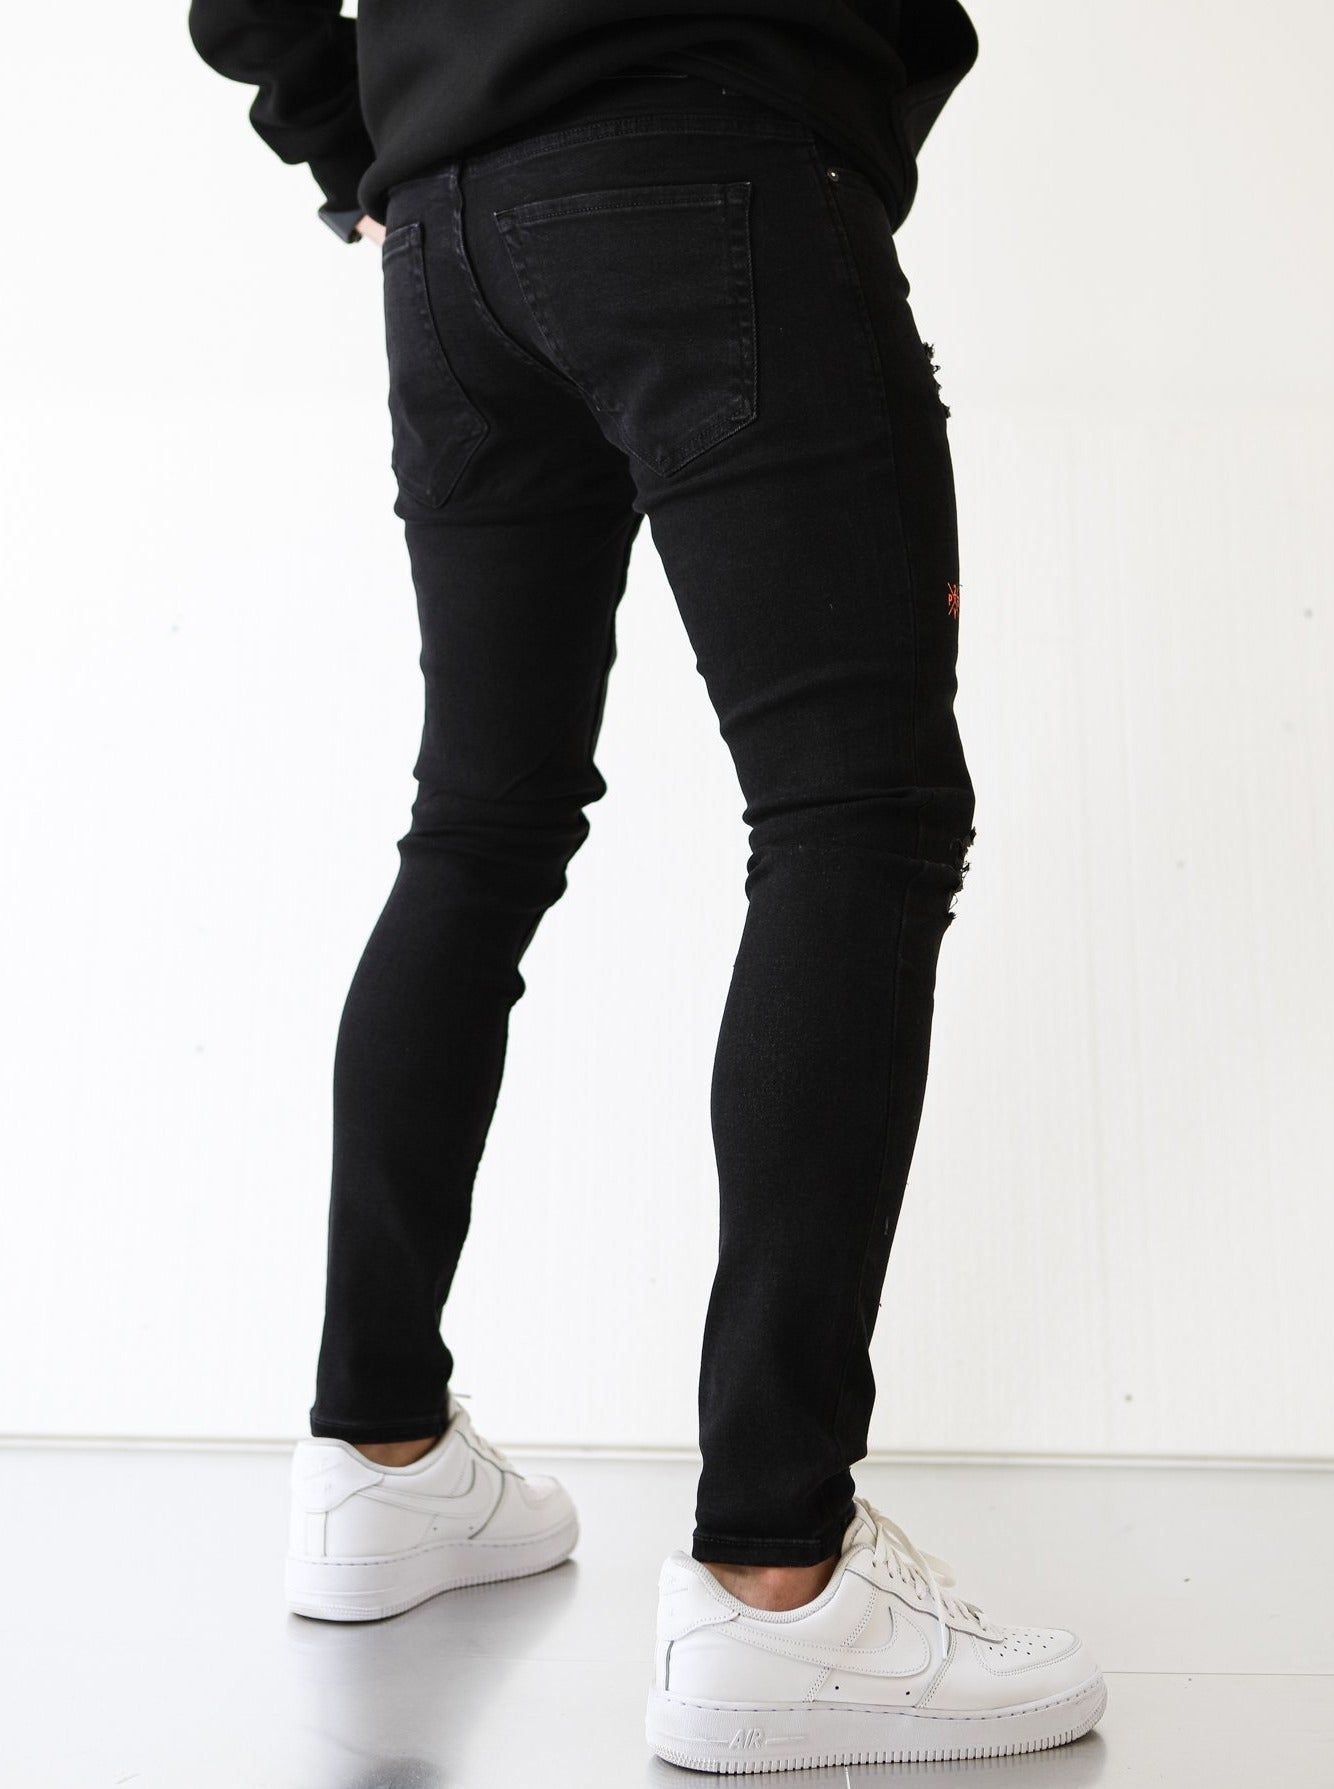 Printed Double Striped Black Jeans - UNEFFECTED STUDIOS® - JEANS - UNEFFECTED